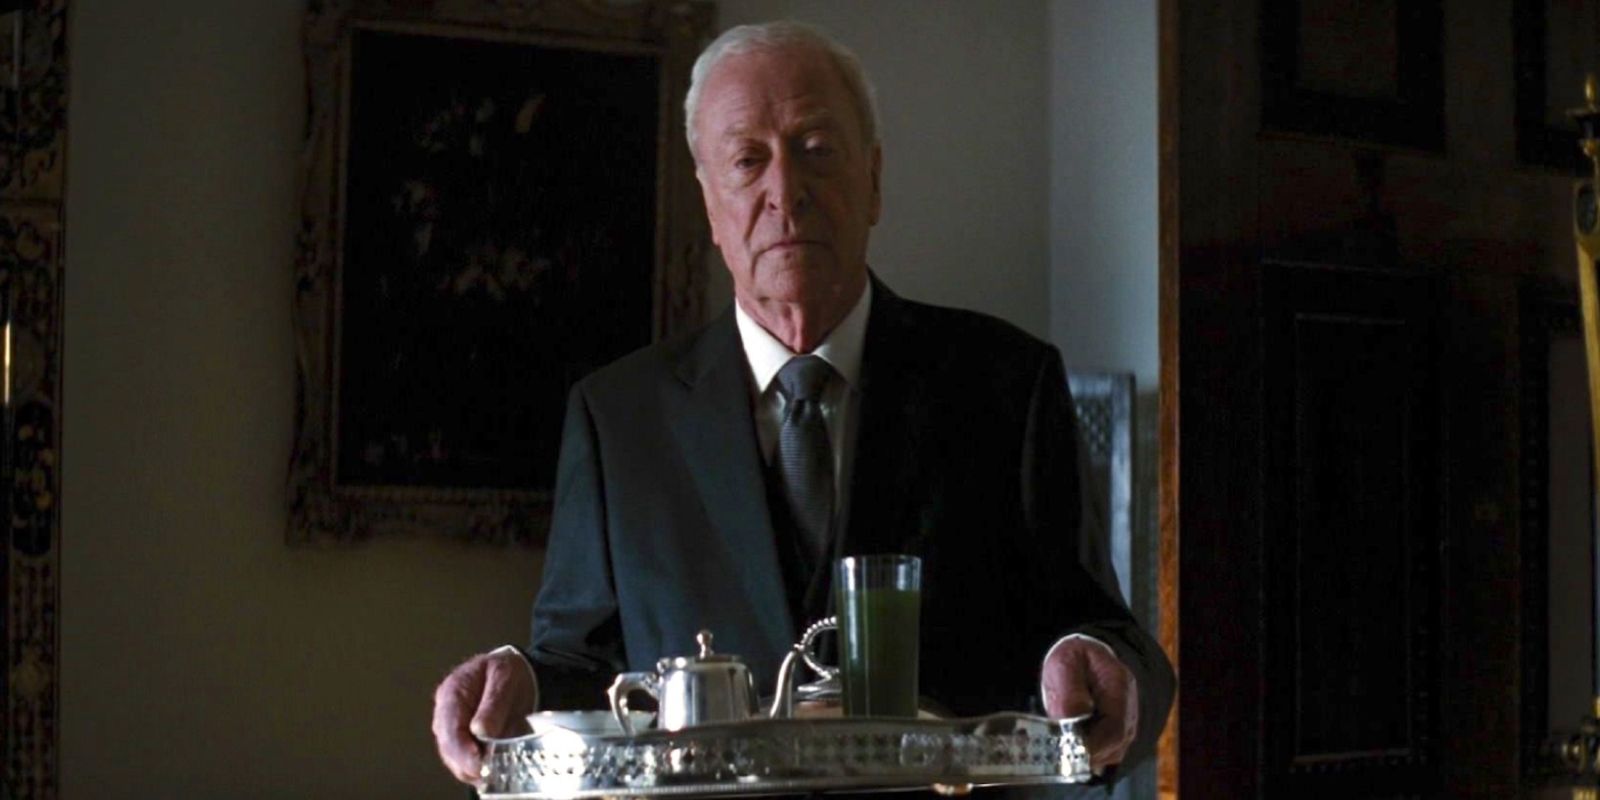 Michael Caine as Alfred holding a tray in The Dark Knight Rises (2012).